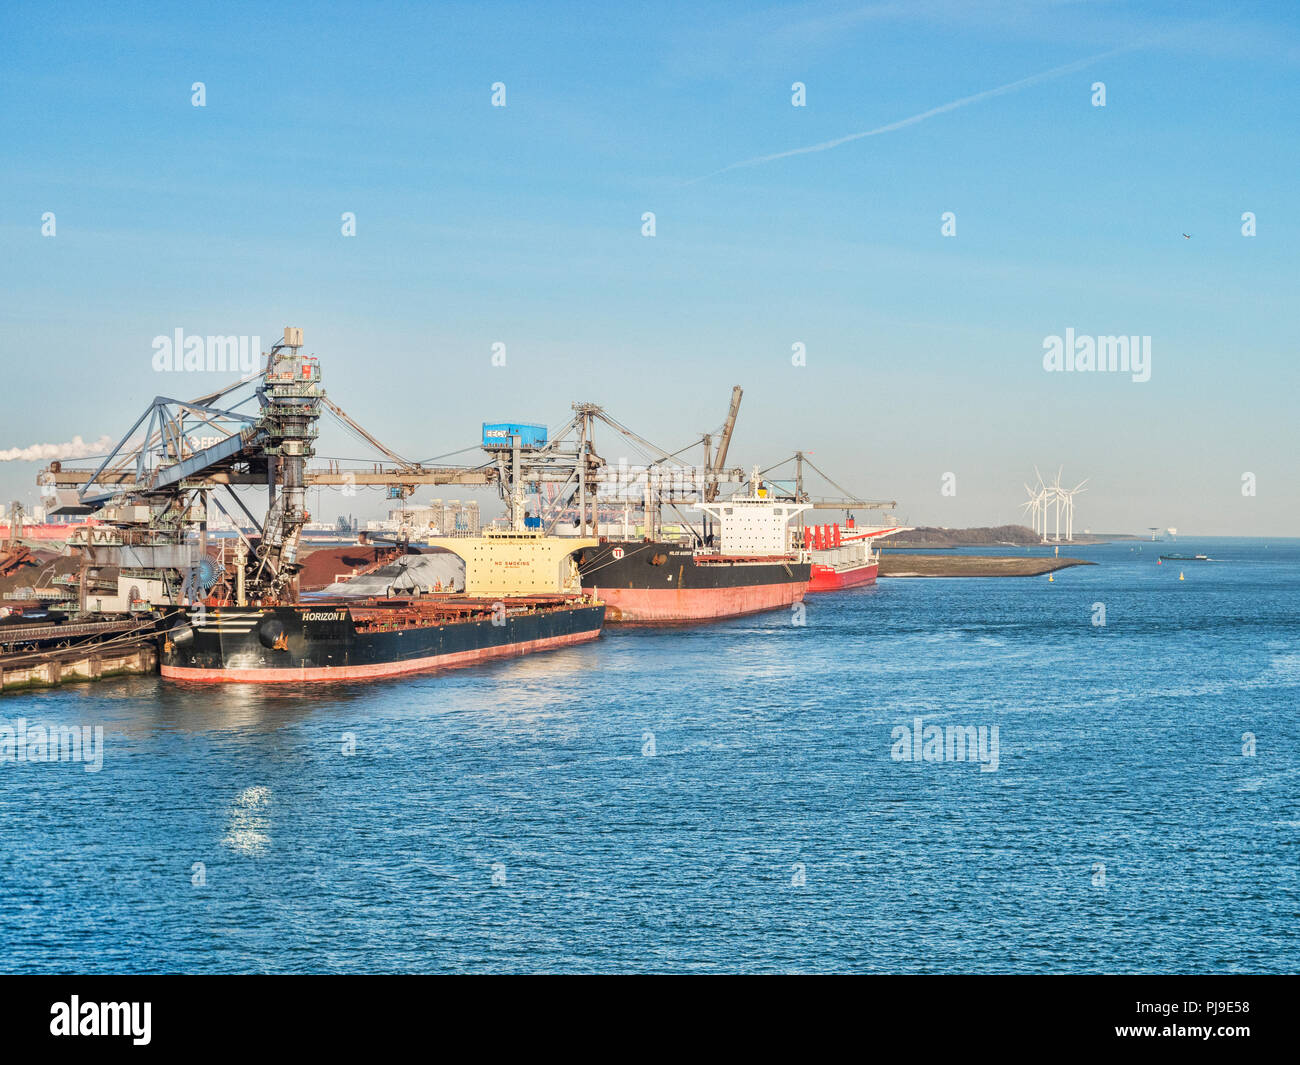 6 April 2018: Rotterdam, Netherlands - Bulk carriers Horizon 2 and Milos Warrior being loaded at Port of Rotterdam on a sunny spring morning with clea Stock Photo